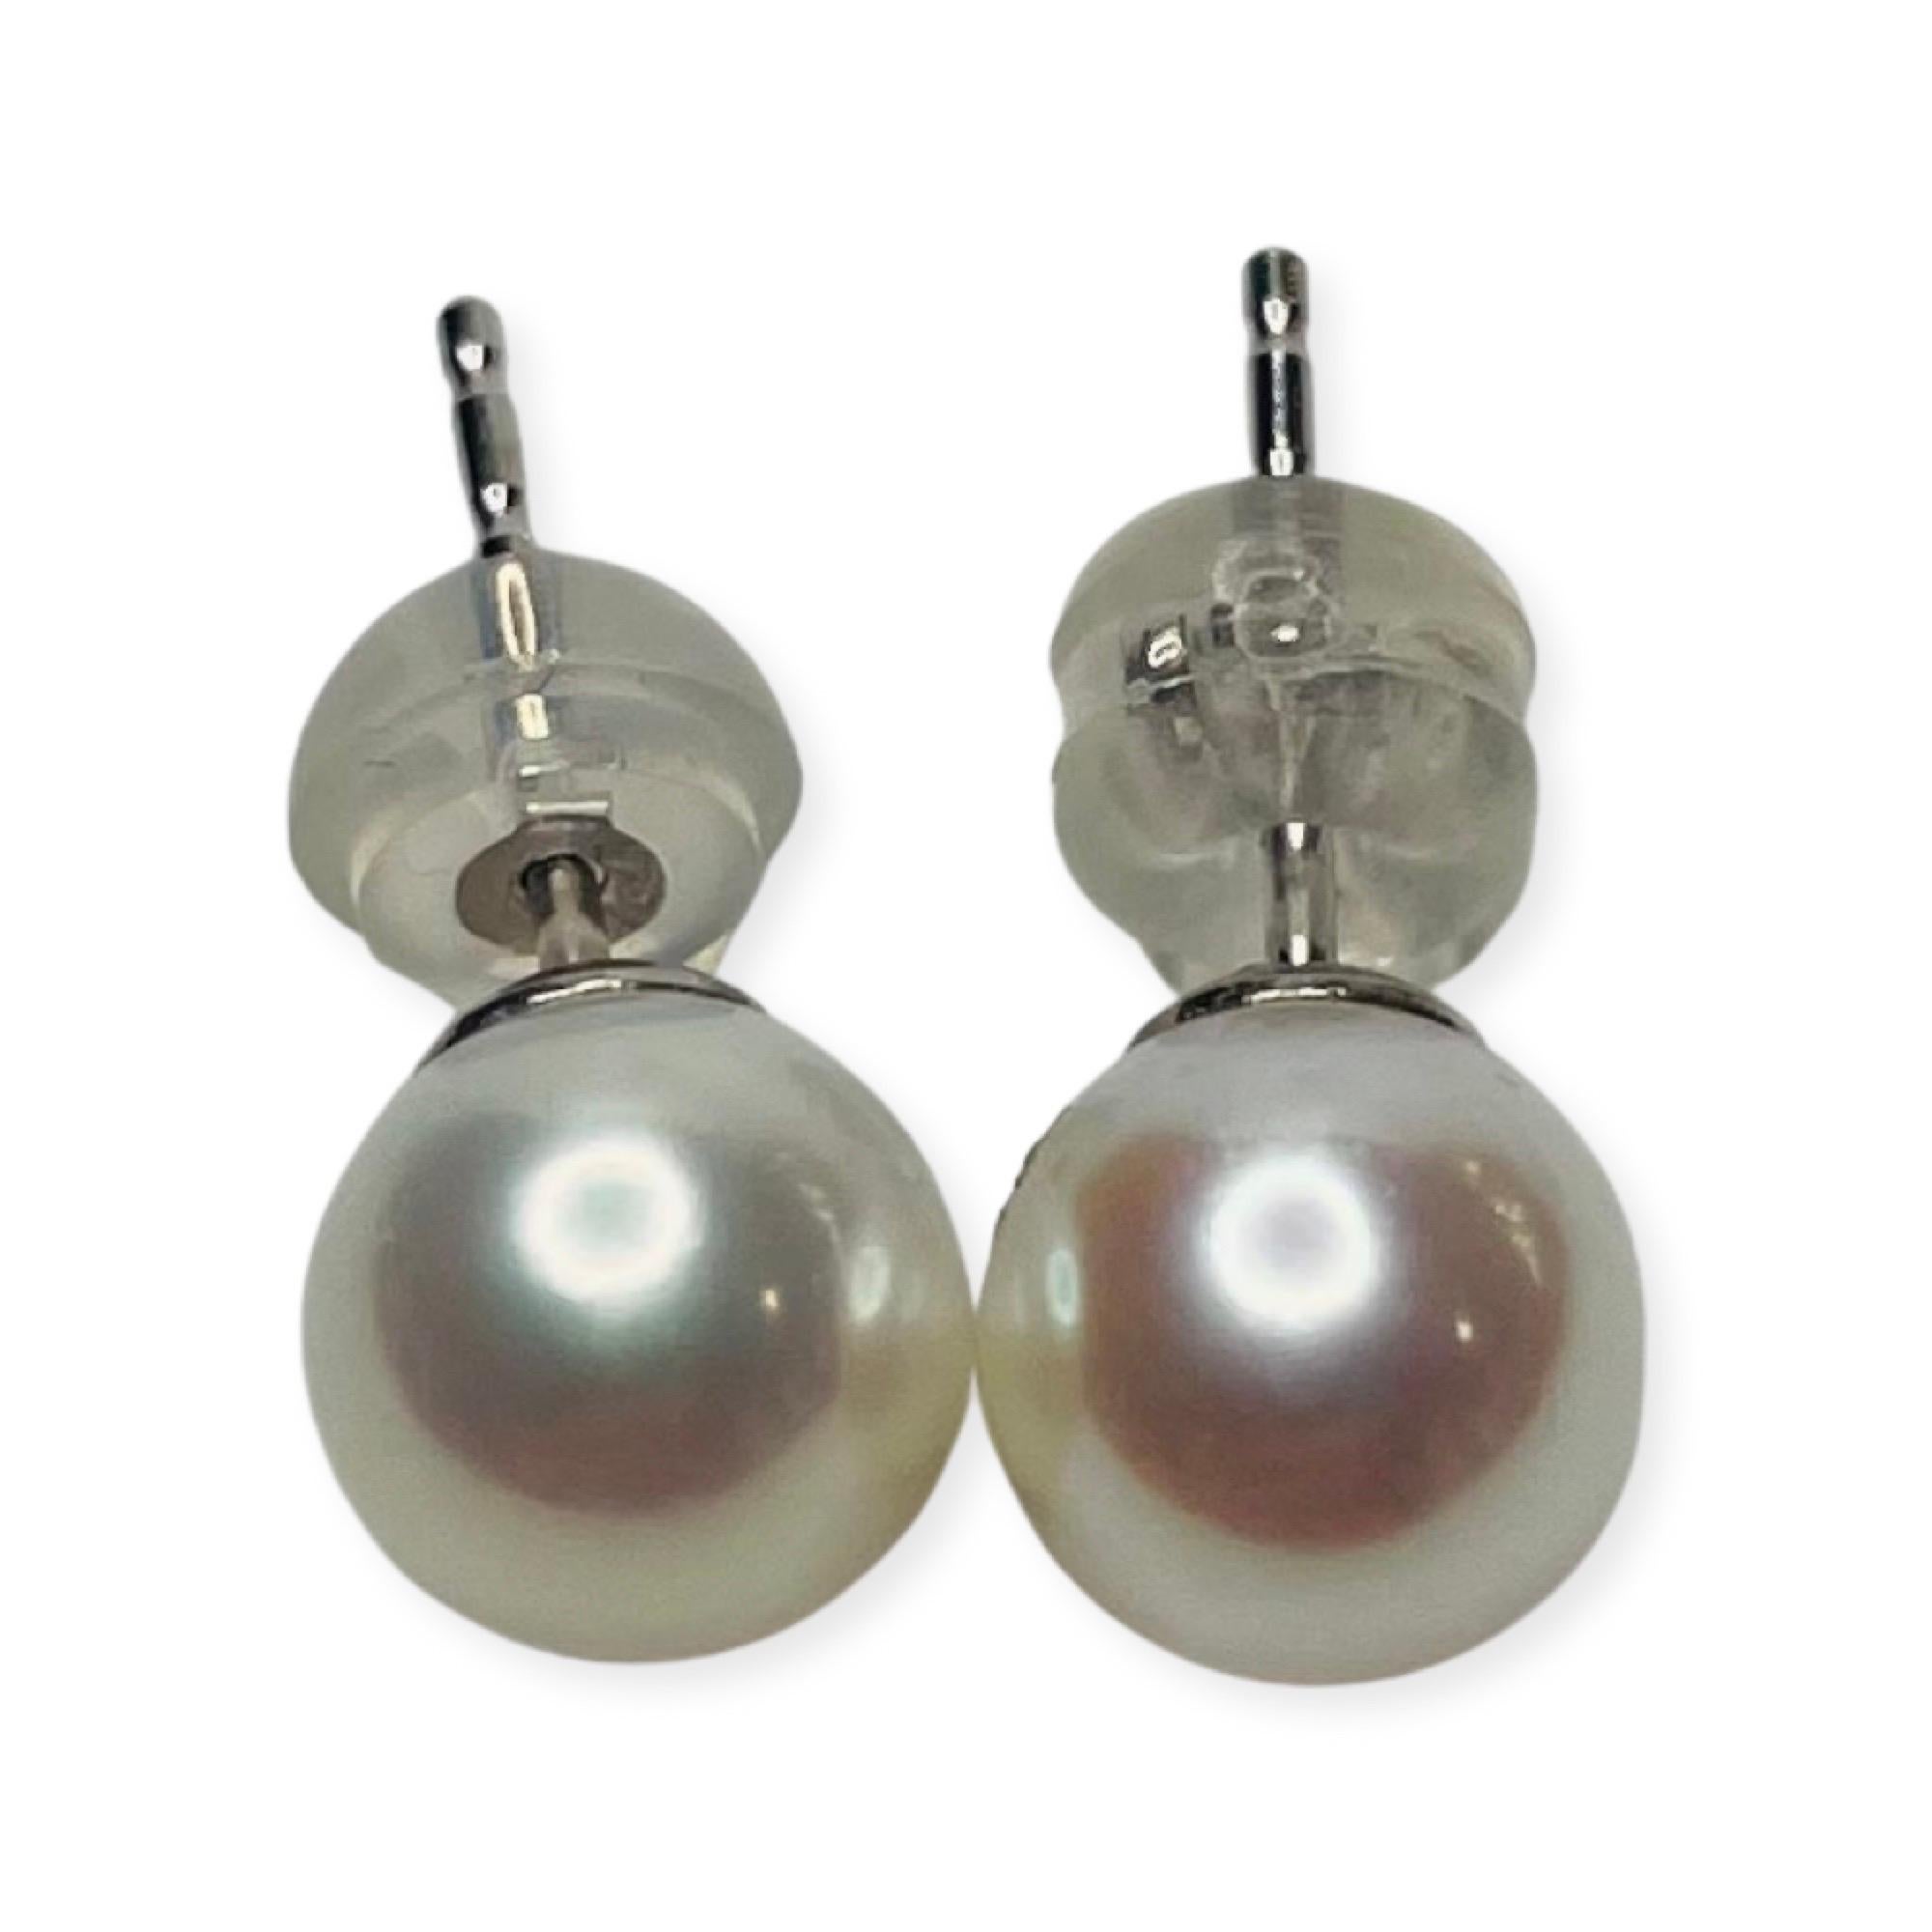 Lithos 18K White Gold Cultured Freshwater Pearl Earrings. The Pearls are 6.5 mm-7.0 mm.  The pearls are round with slight blemishes and high luster. They have a rose overtone. These are Stud earrings with 18KW posts and 14KW backs embedded in